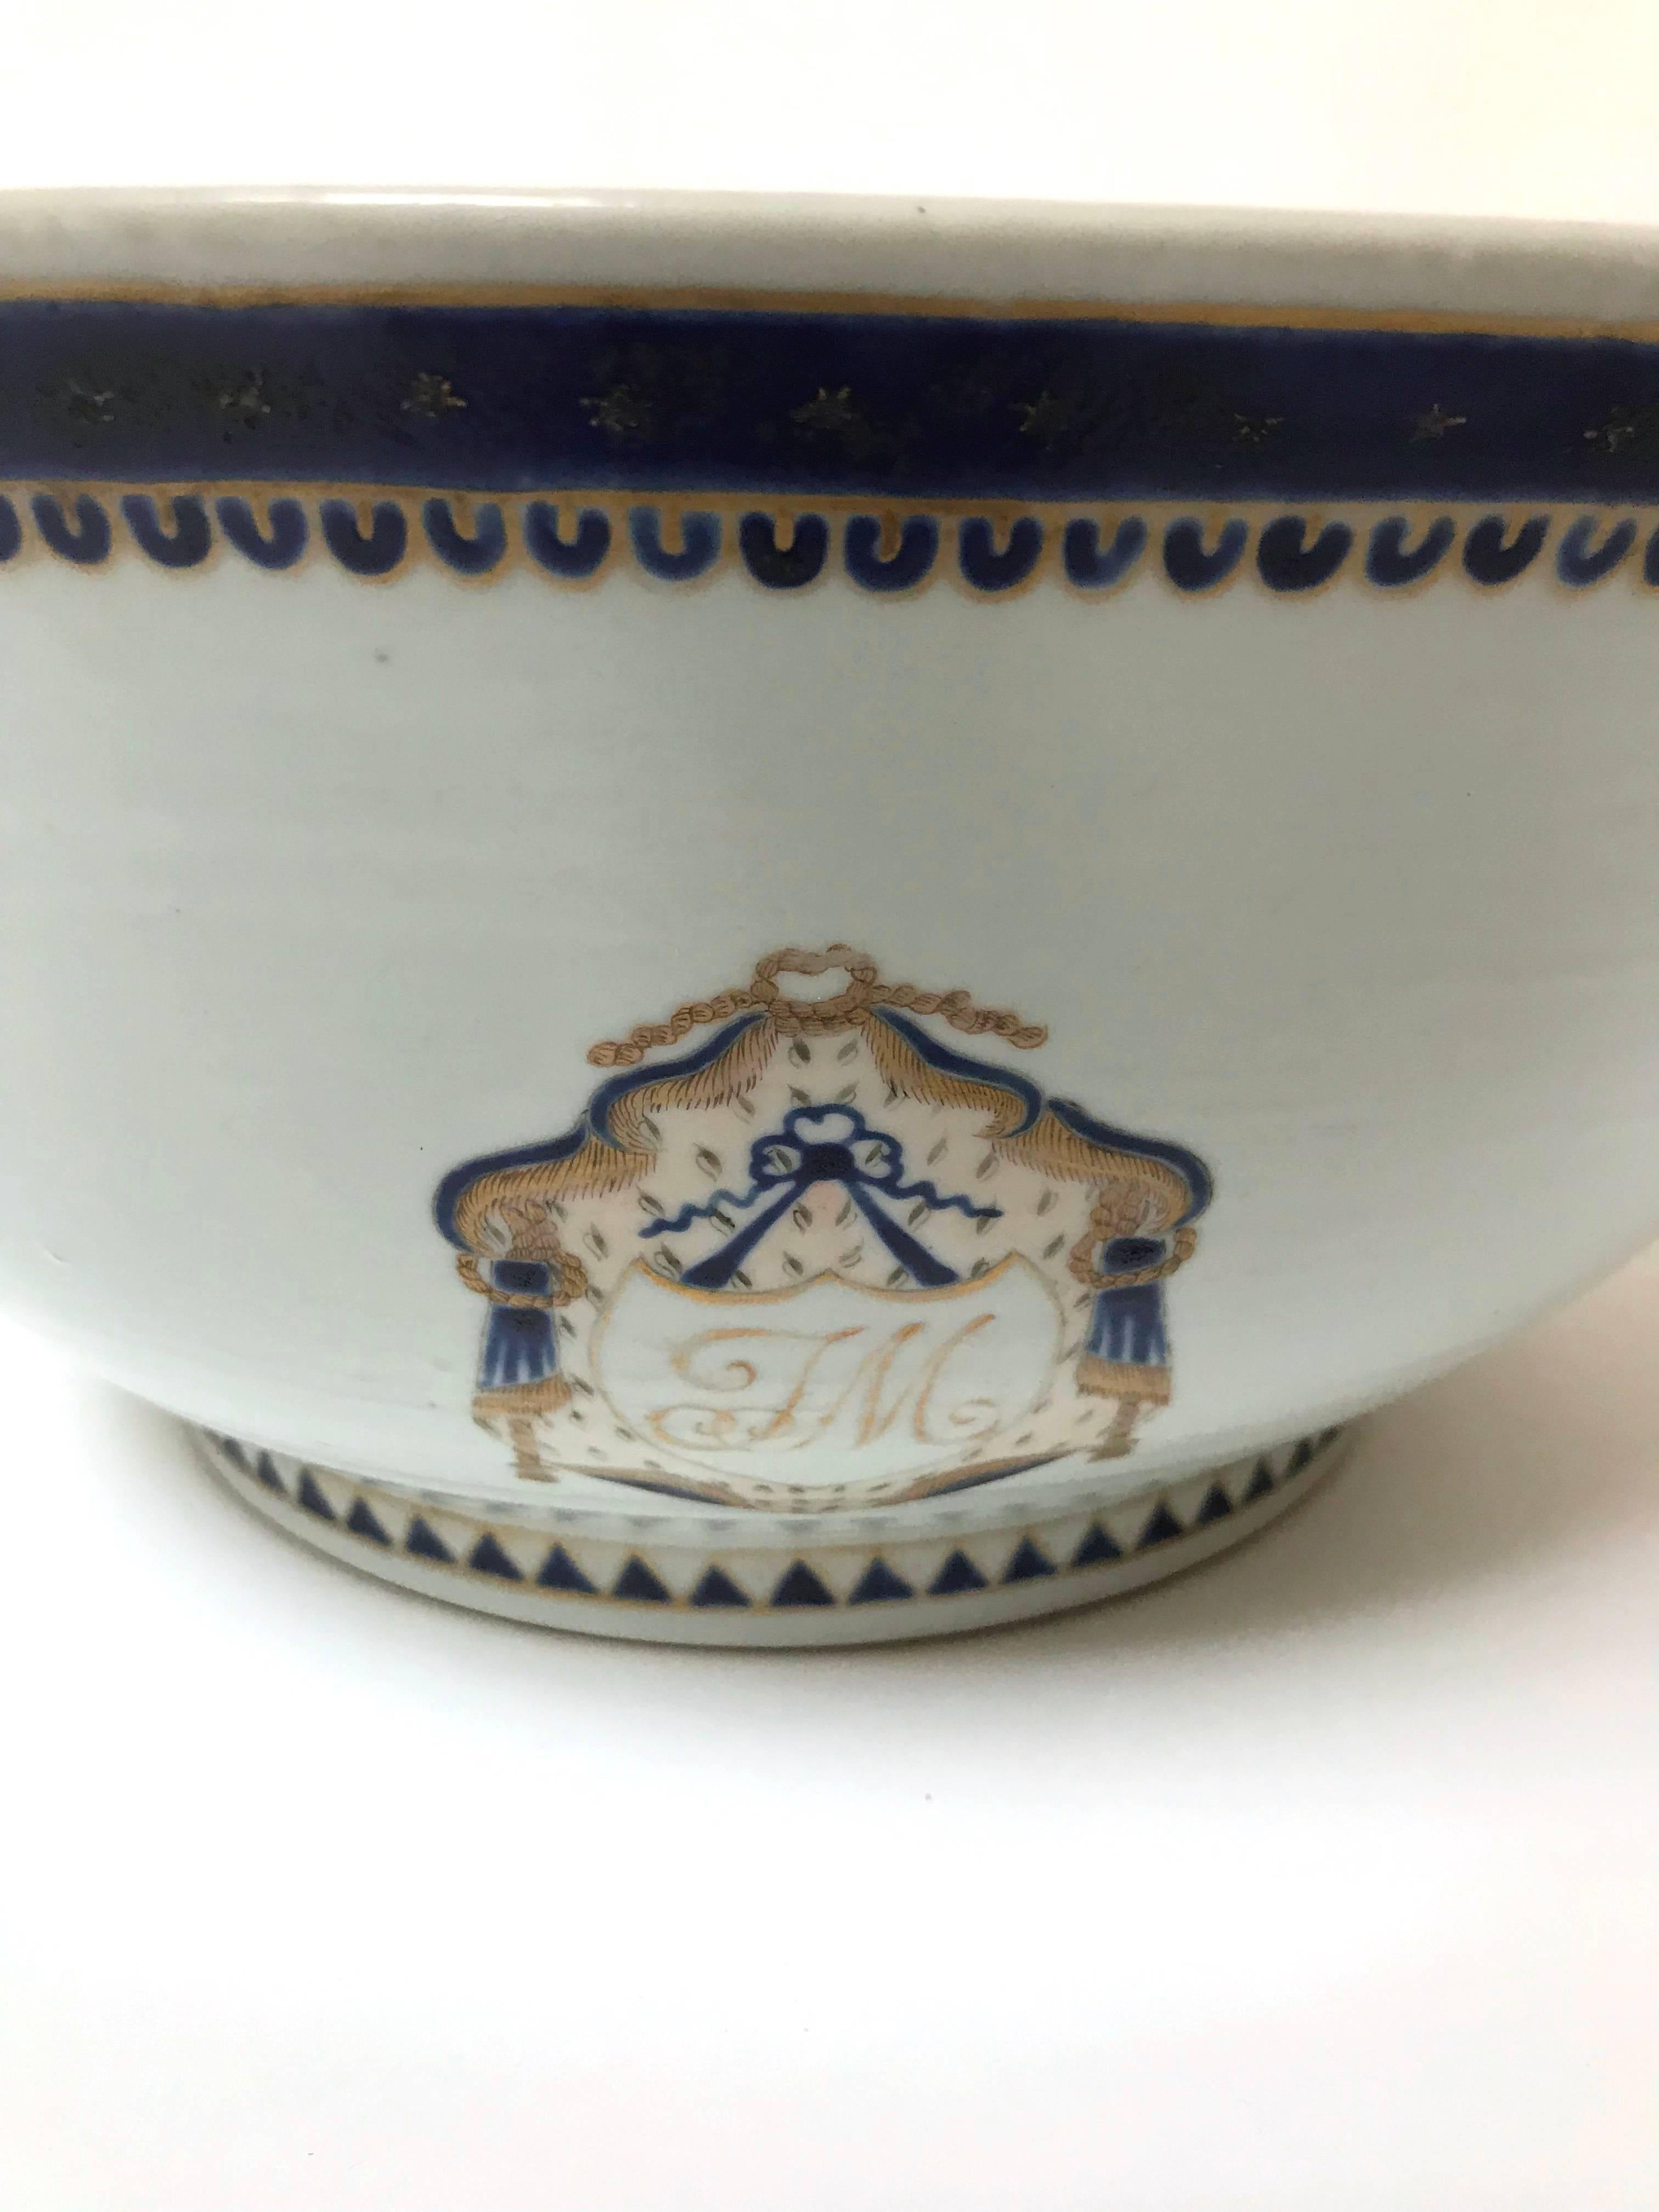 A large Chinese export armorial porcelain punch bowl, circa 1790-1810, heavily potted and decorated with two armorial devices, each on opposing sides, consisting of a cursive monogram 